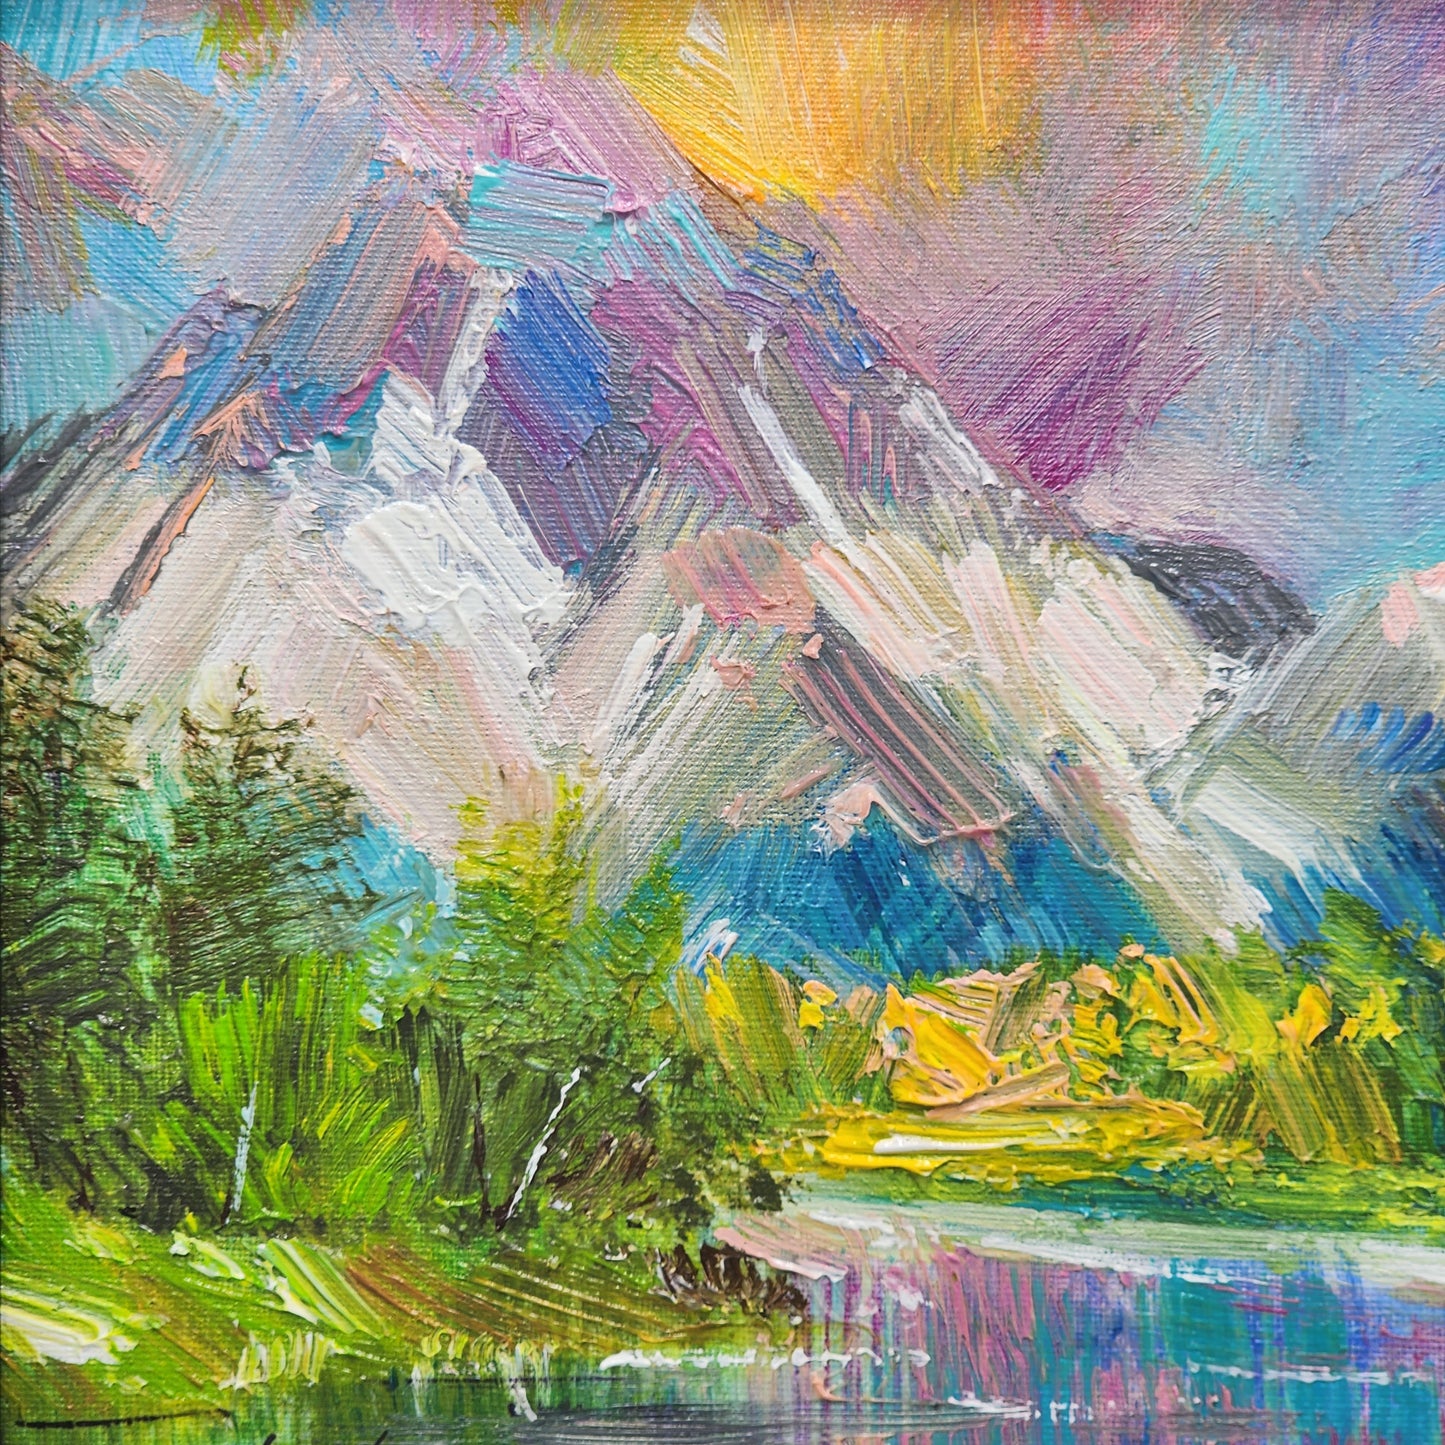 Signed Expressionist Landscape Oil on Canvas Painting of Mountains & River